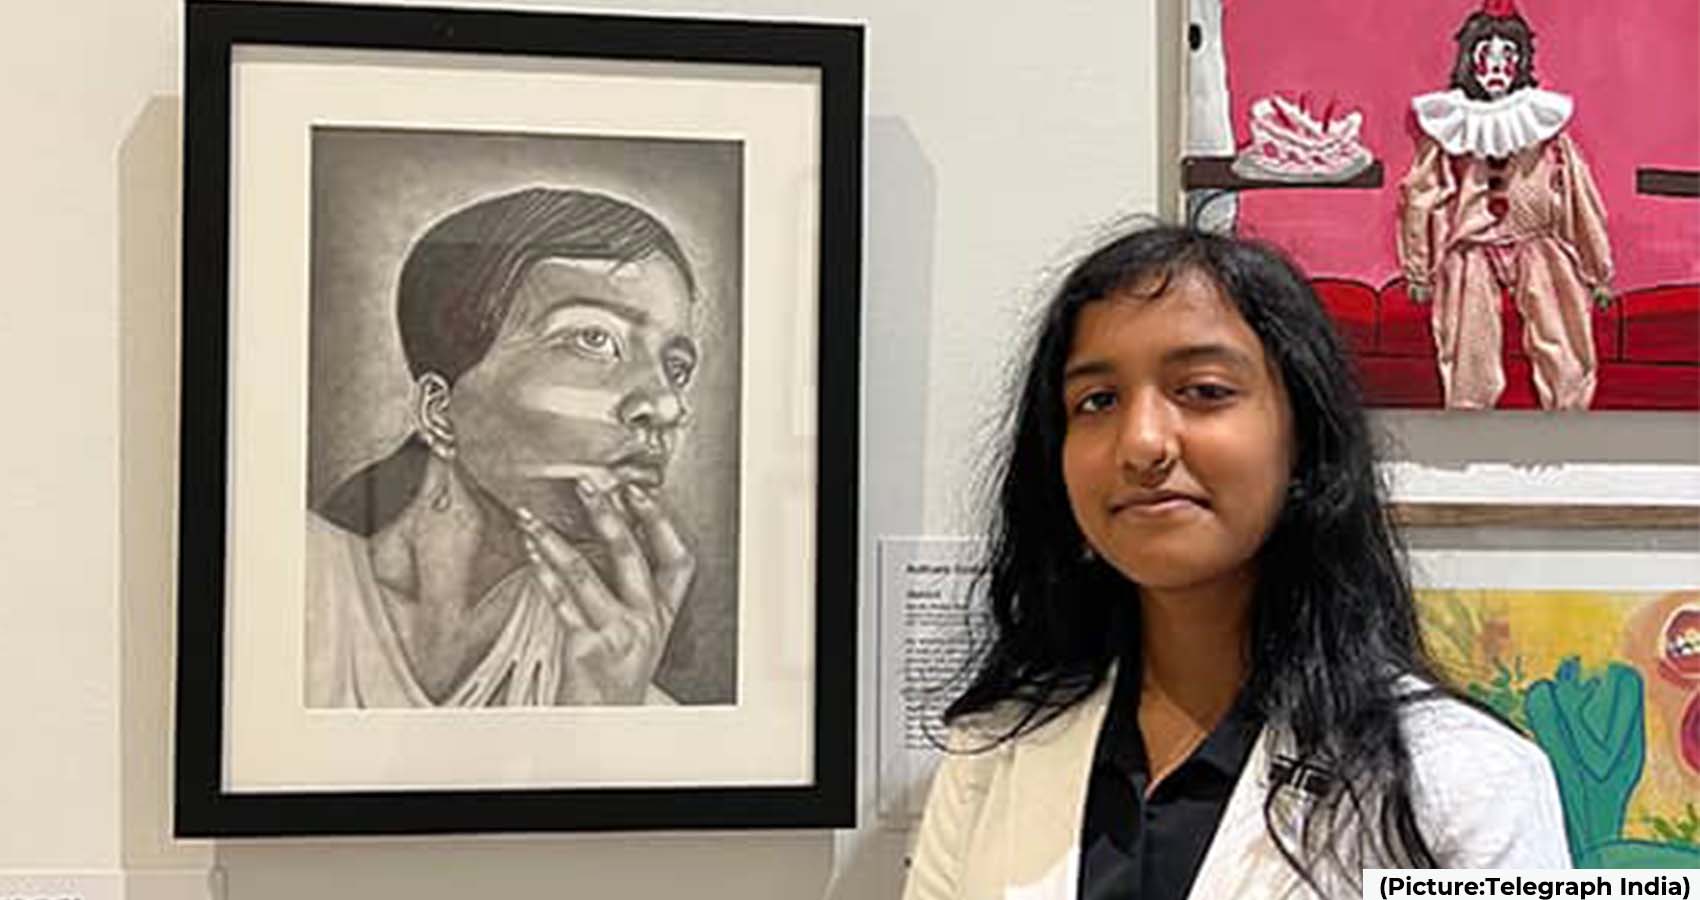 Artwork By Sraddha Karthik, A High Schooler From Florida To Be Displayed At The US Capitol